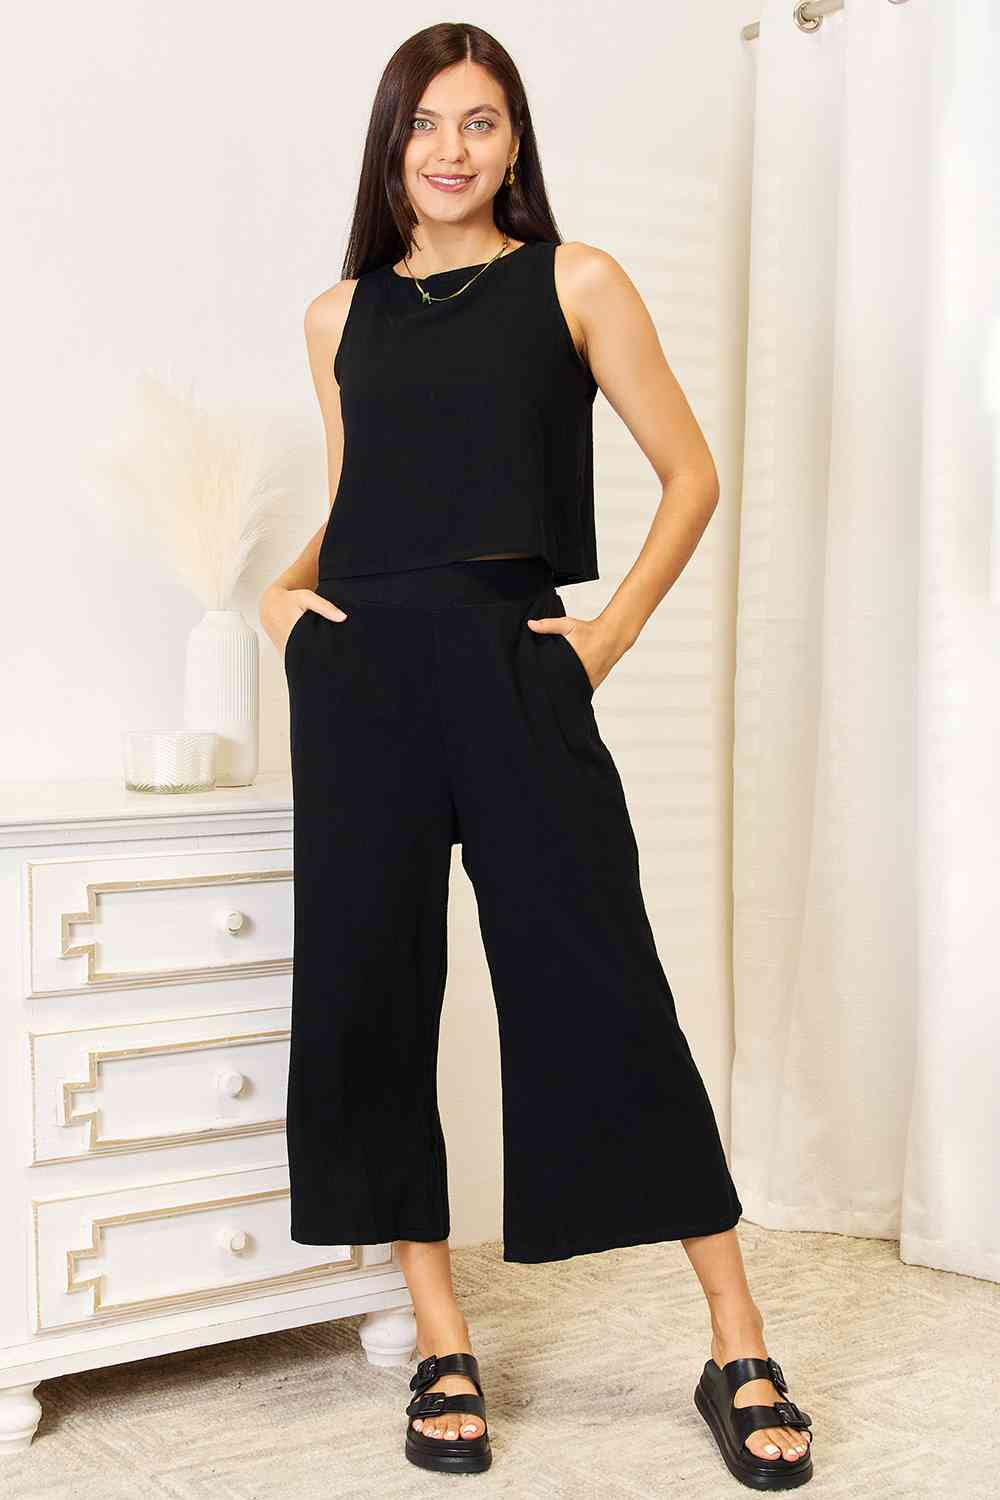 Double Take Buttoned Round Neck Tank and Wide Leg Pants Set - nailedmoms